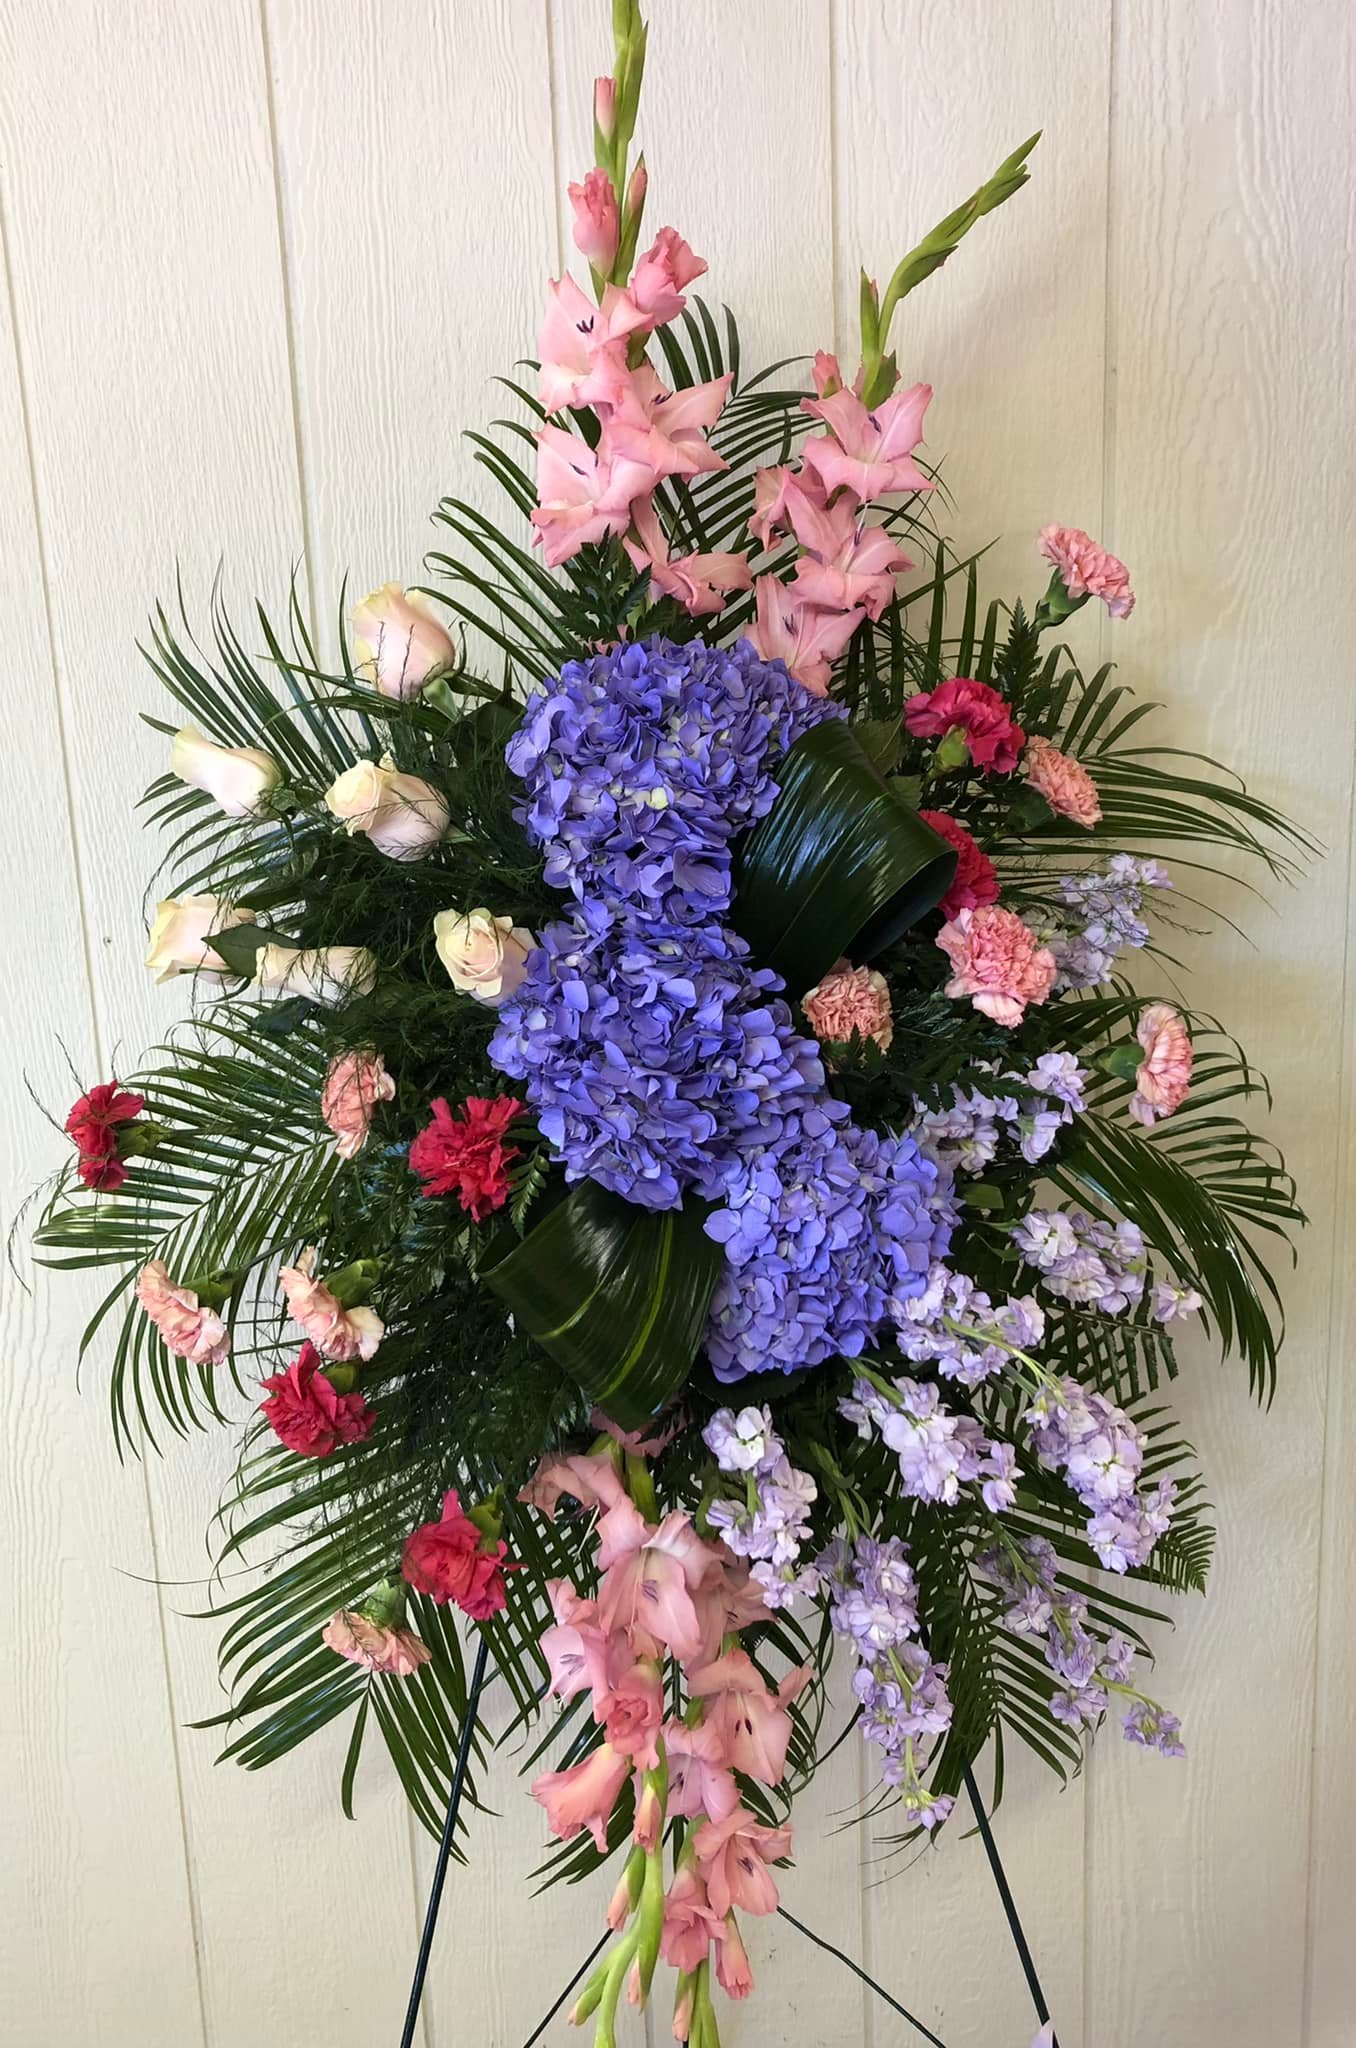 Jan's Flowers and Gifts 5733 US-69, Kountze Texas 77625